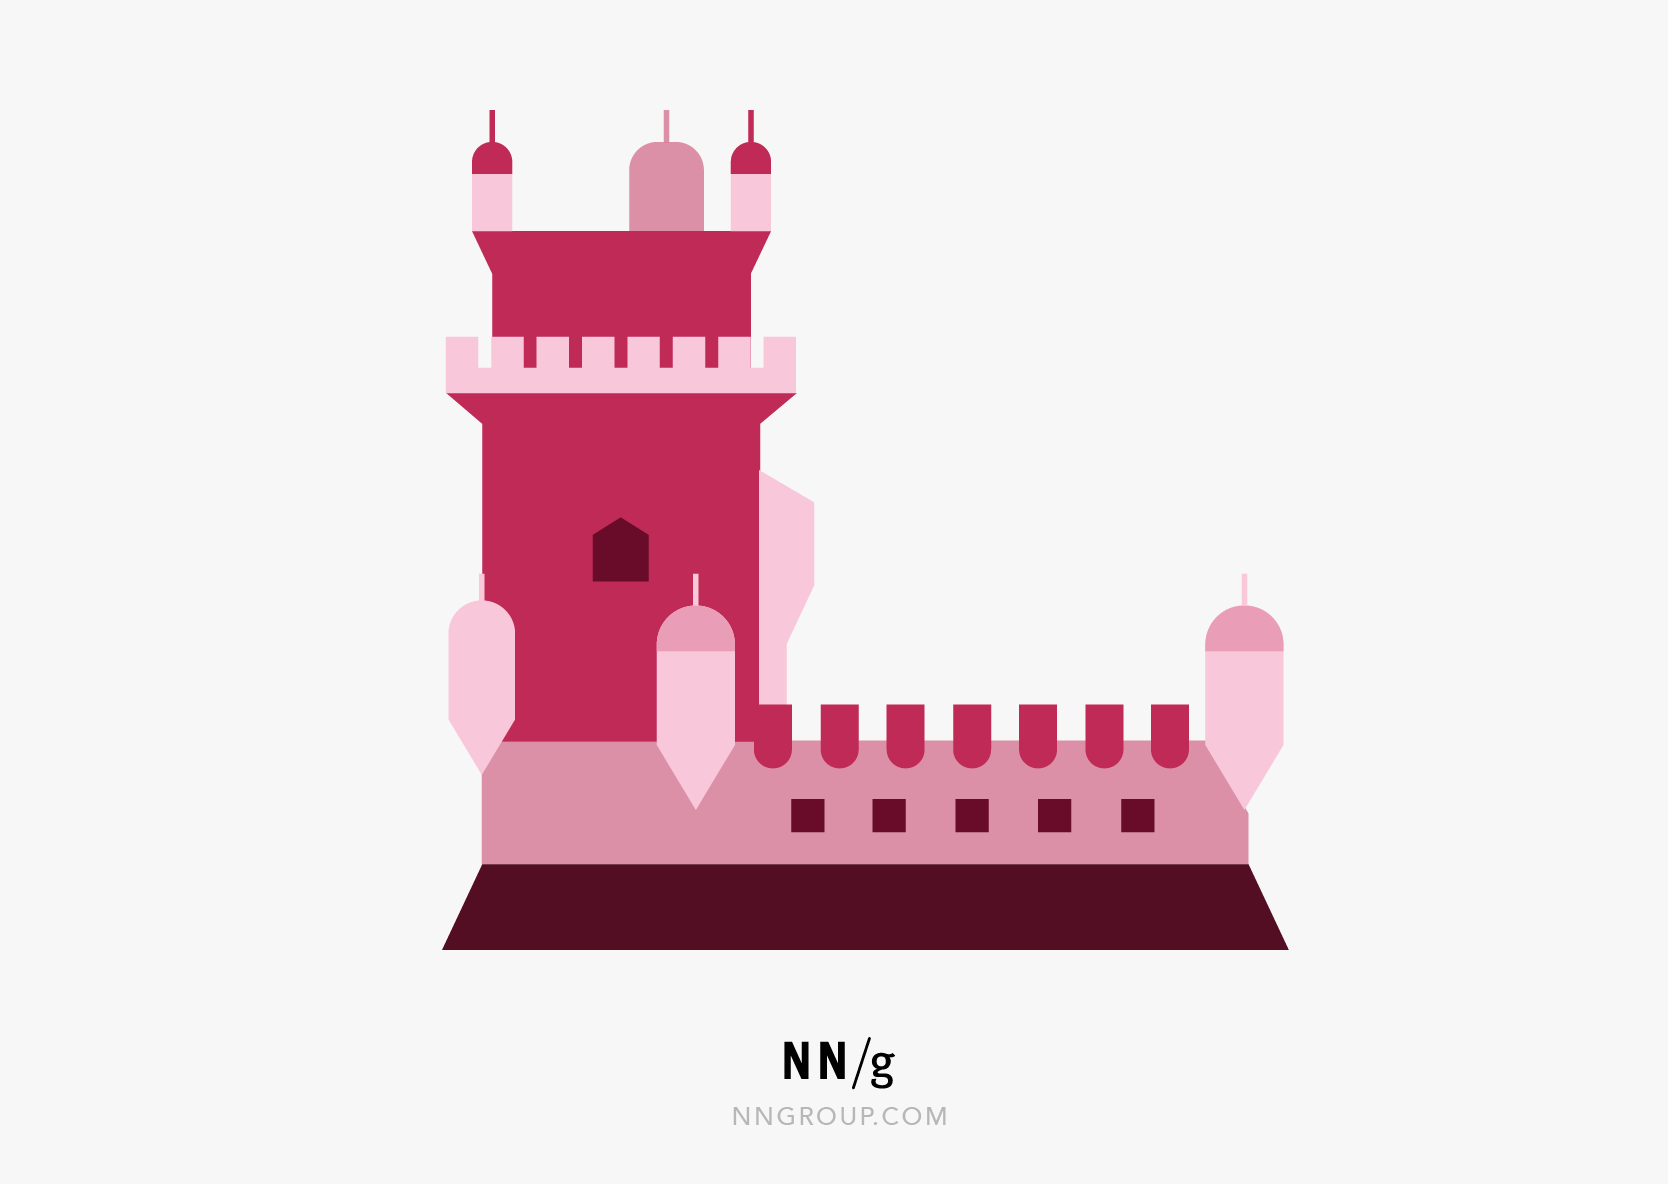 Usability Heuristic #6: A castle that represents Lisbon. It is easier for people to hear the capital and place it's country, rather than name a capital outright.